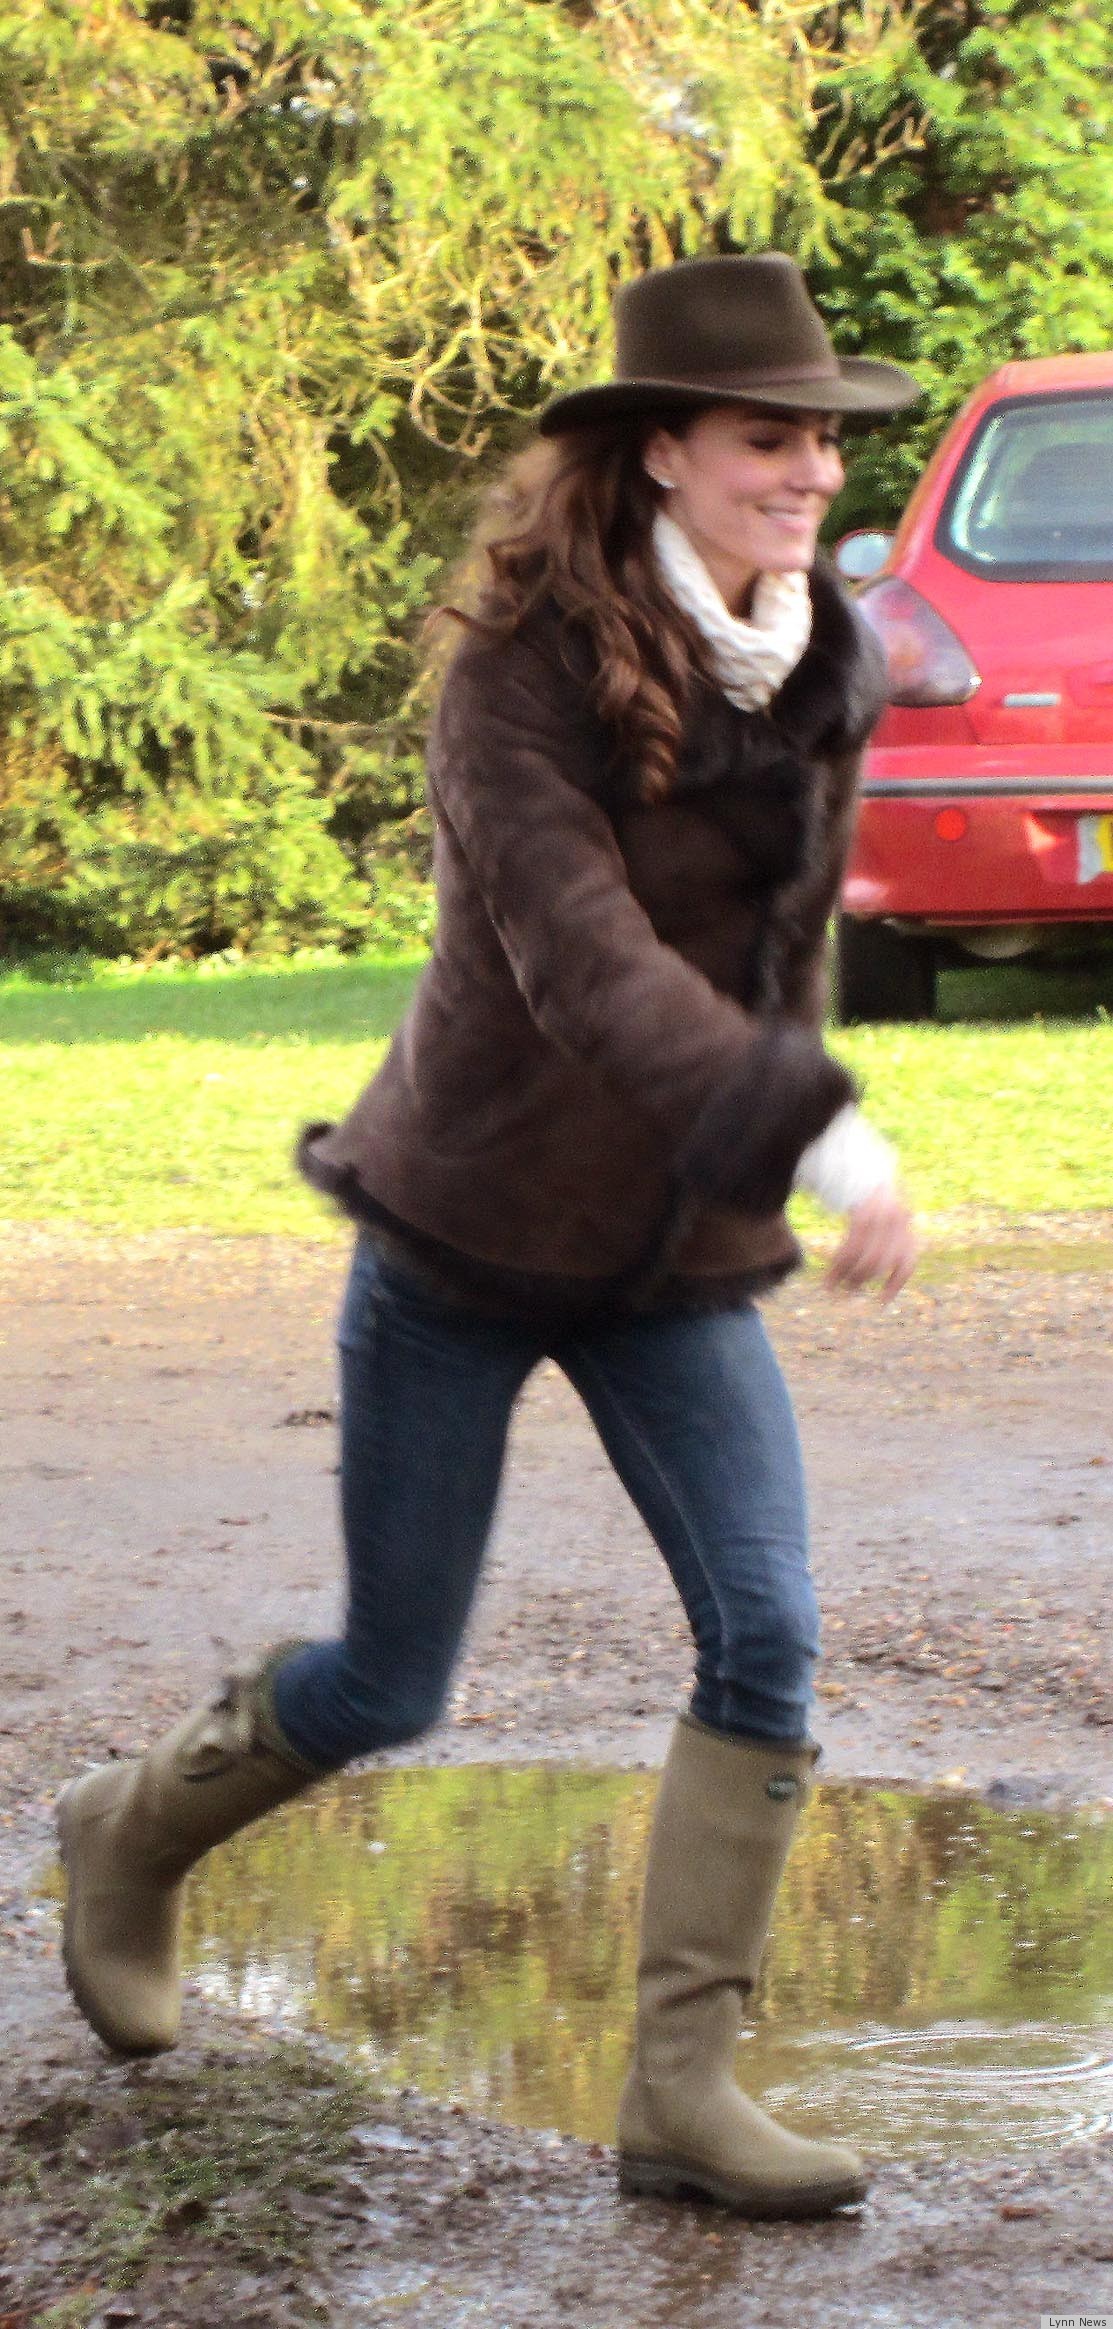 Kate Middleton Dons Hat, Wellies For Football On Christmas Eve 2011 | HuffPost Life